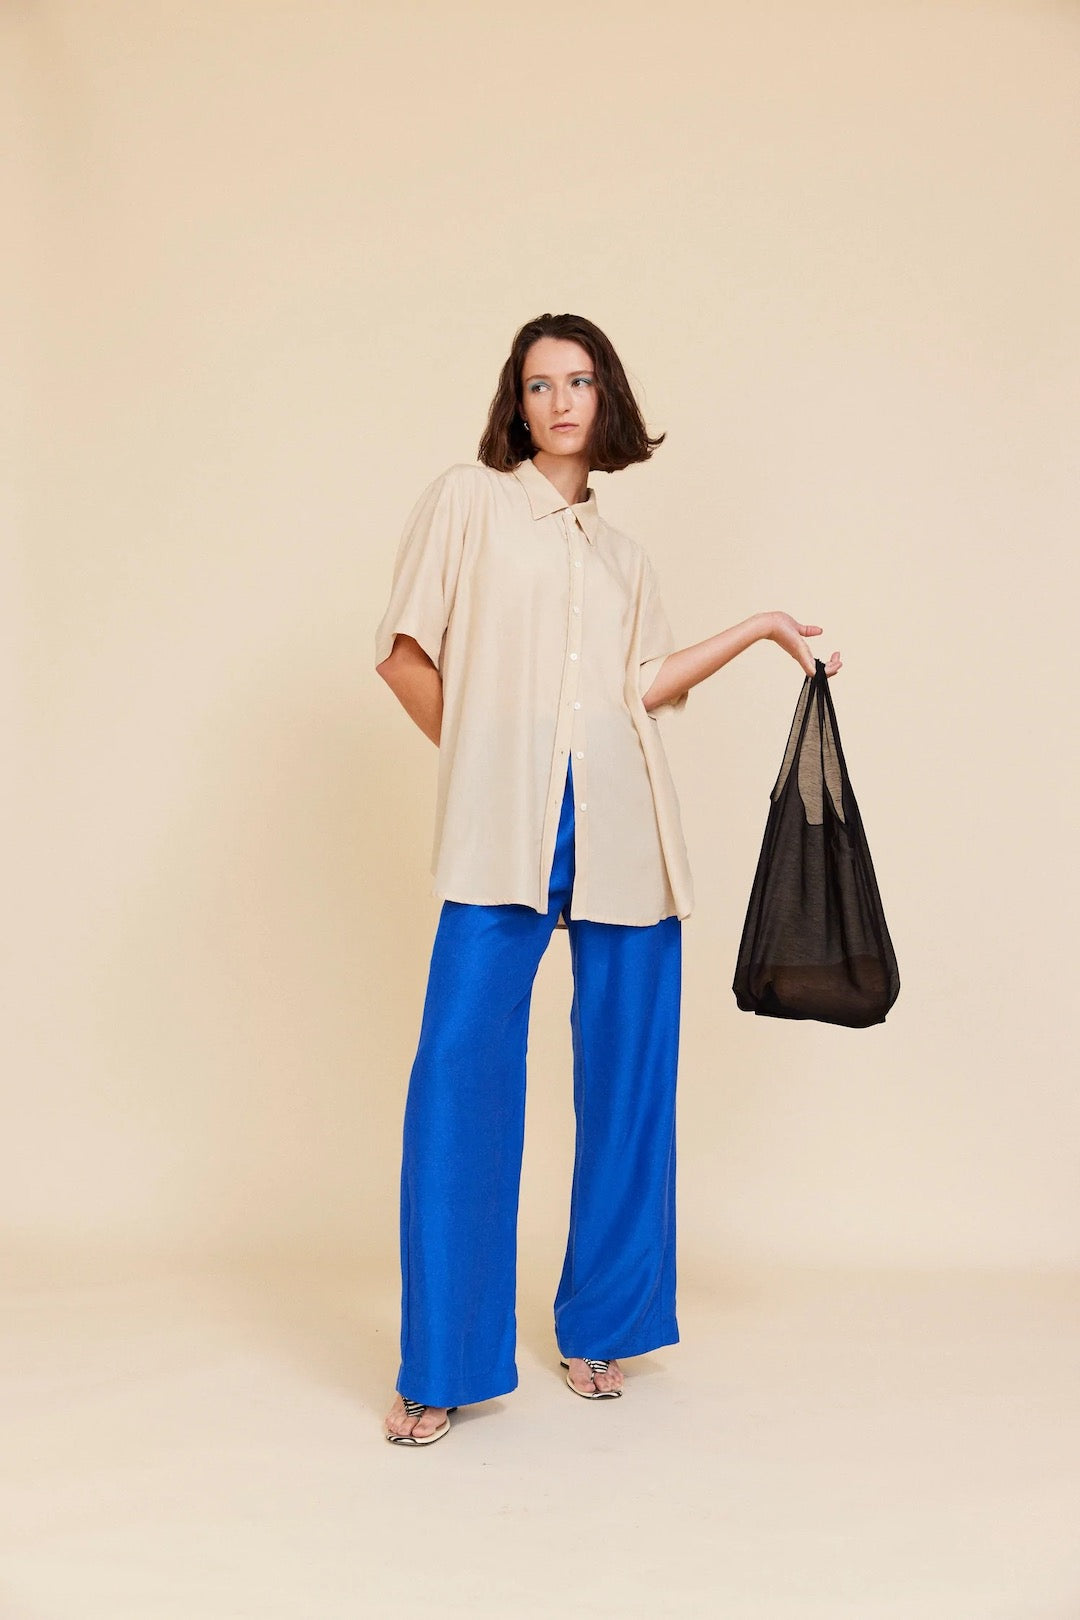 A woman in a tan shirt and blue wide leg pants holding a OVNA OVICH Wander Bag – Onyx.